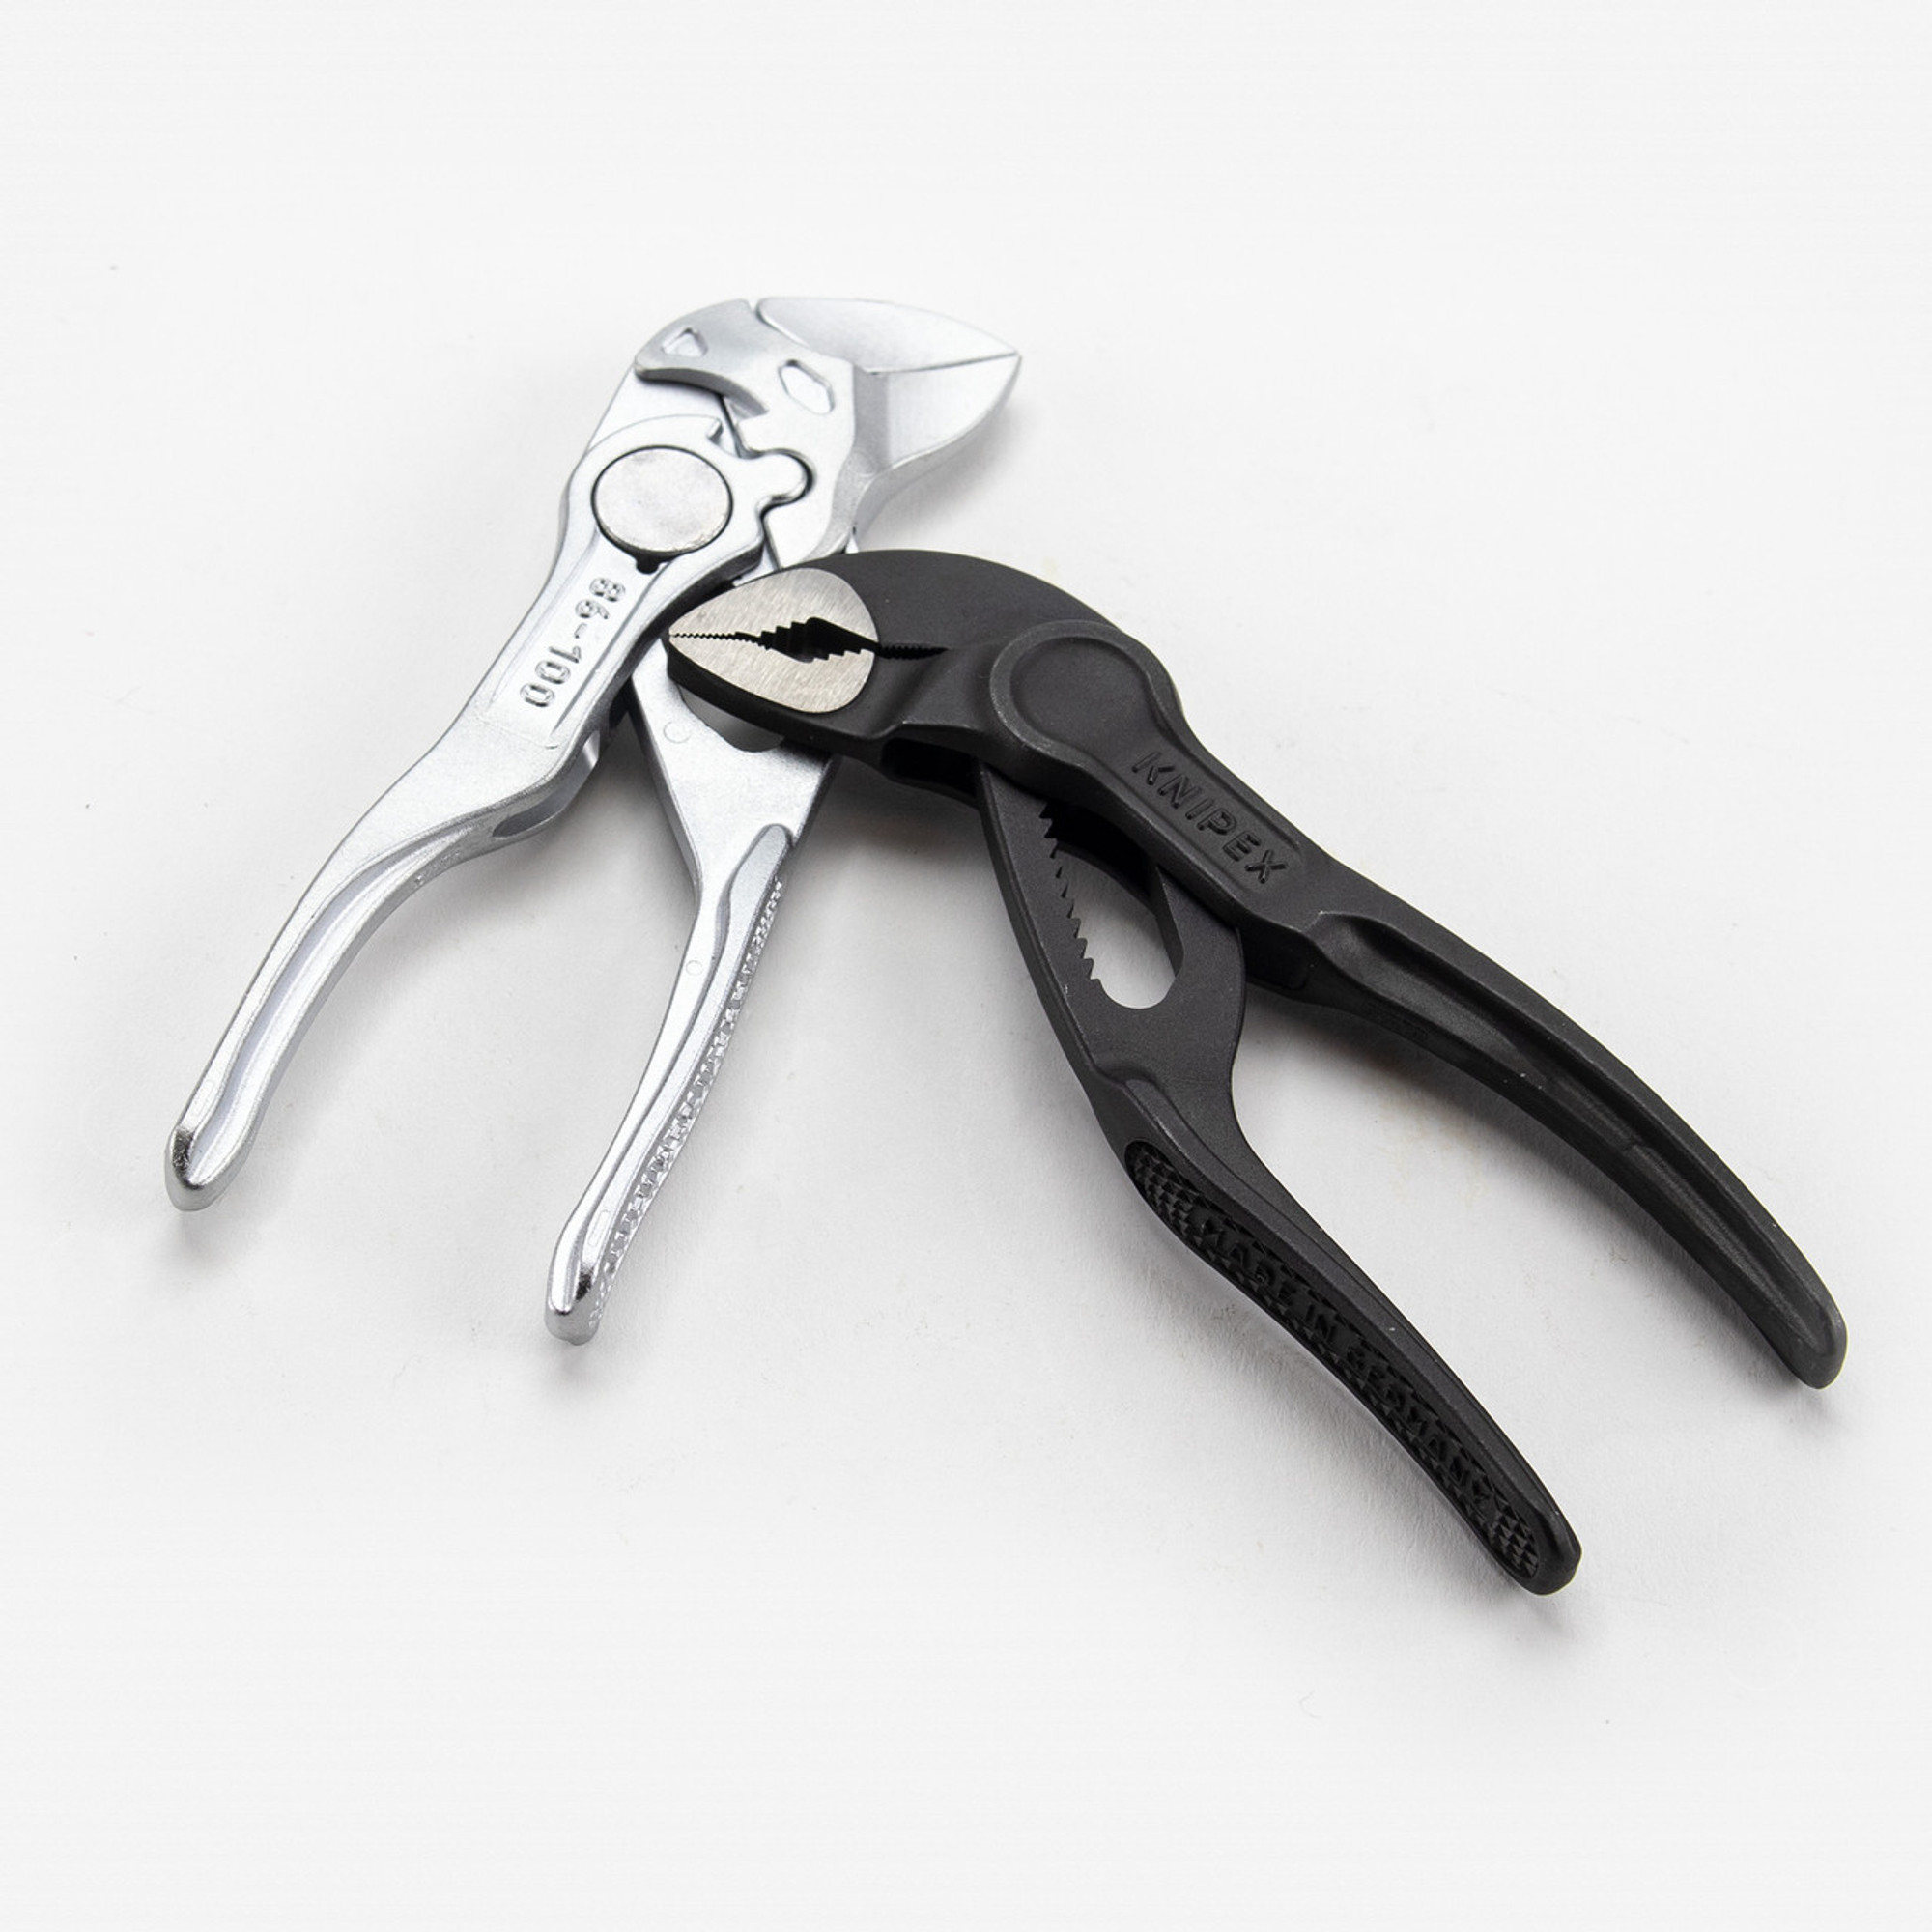 Knipex Cobra XS are the Ultimate Pocket Pliers